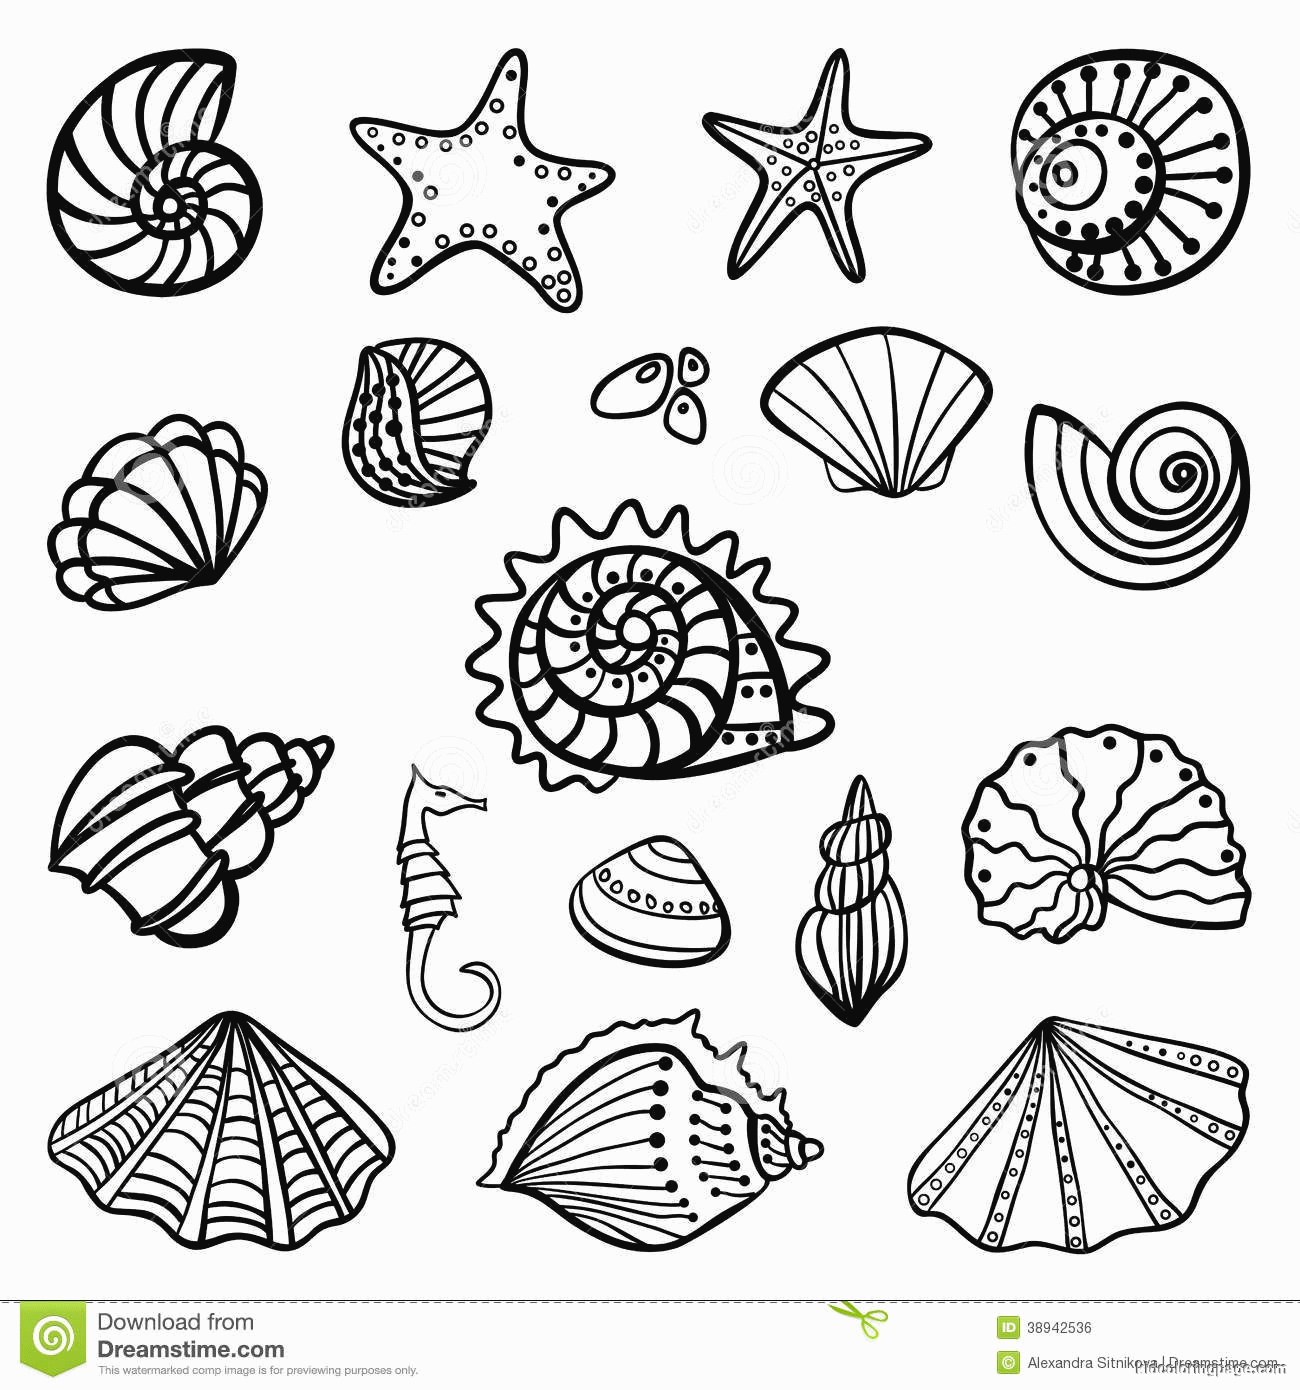 Seashell Coloring Page - Coloring Pages for Kids and for Adults